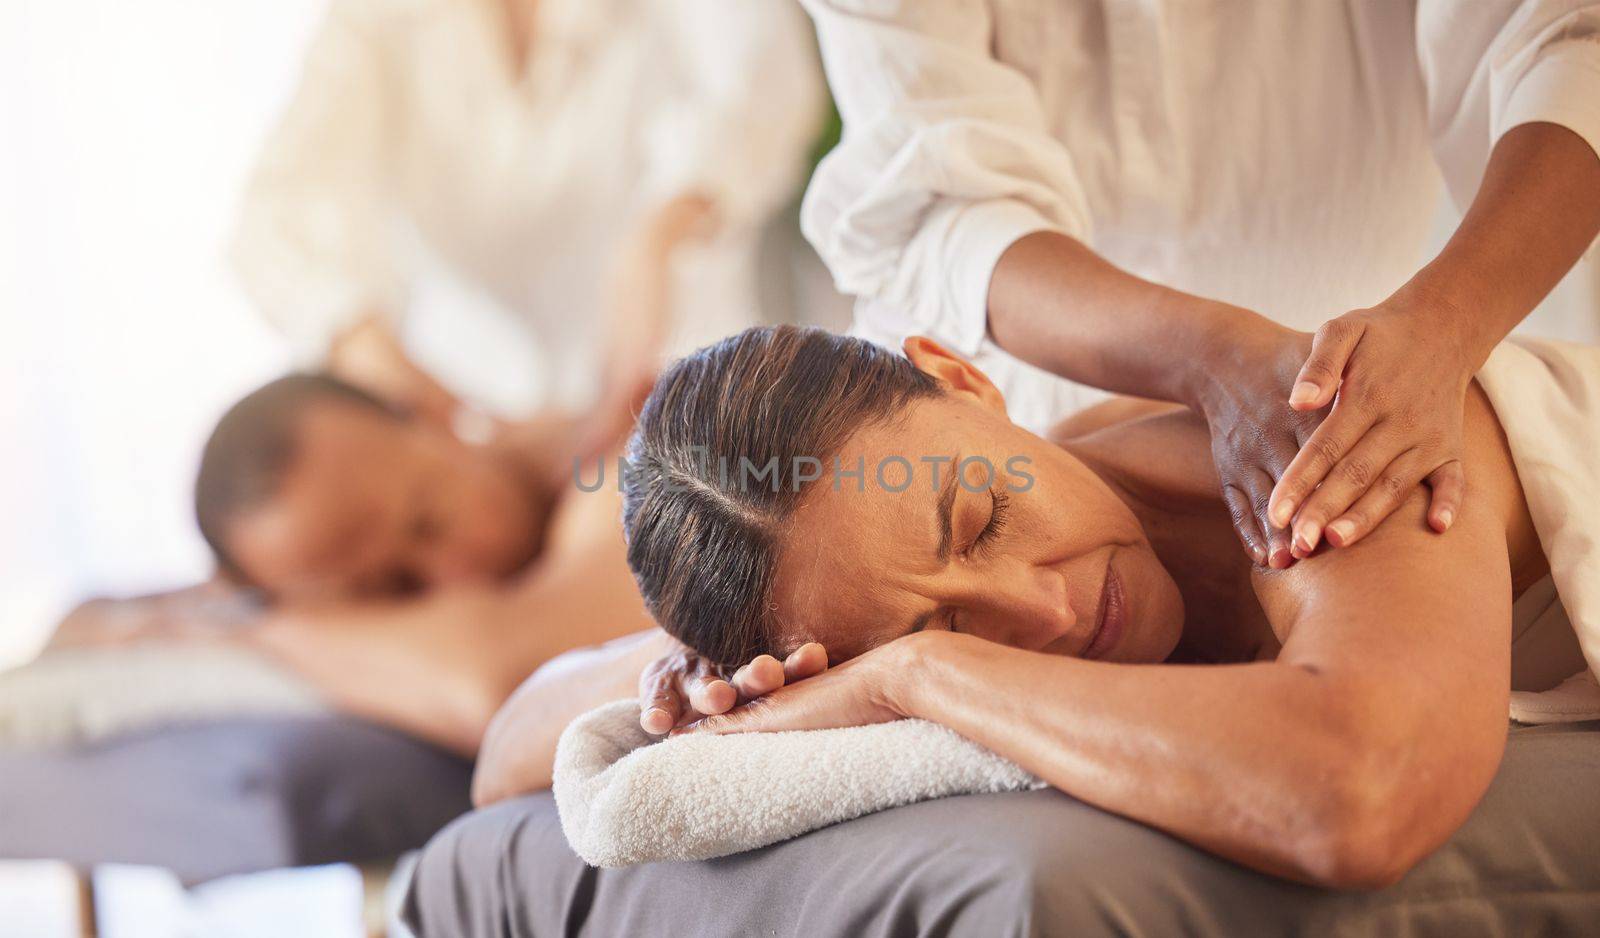 Massage, relax and peace with couple in spa for healing, health and zen treatment. Detox, skincare and beauty with hands of massage therapist on man and woman for calm, physical therapy and luxury by YuriArcurs